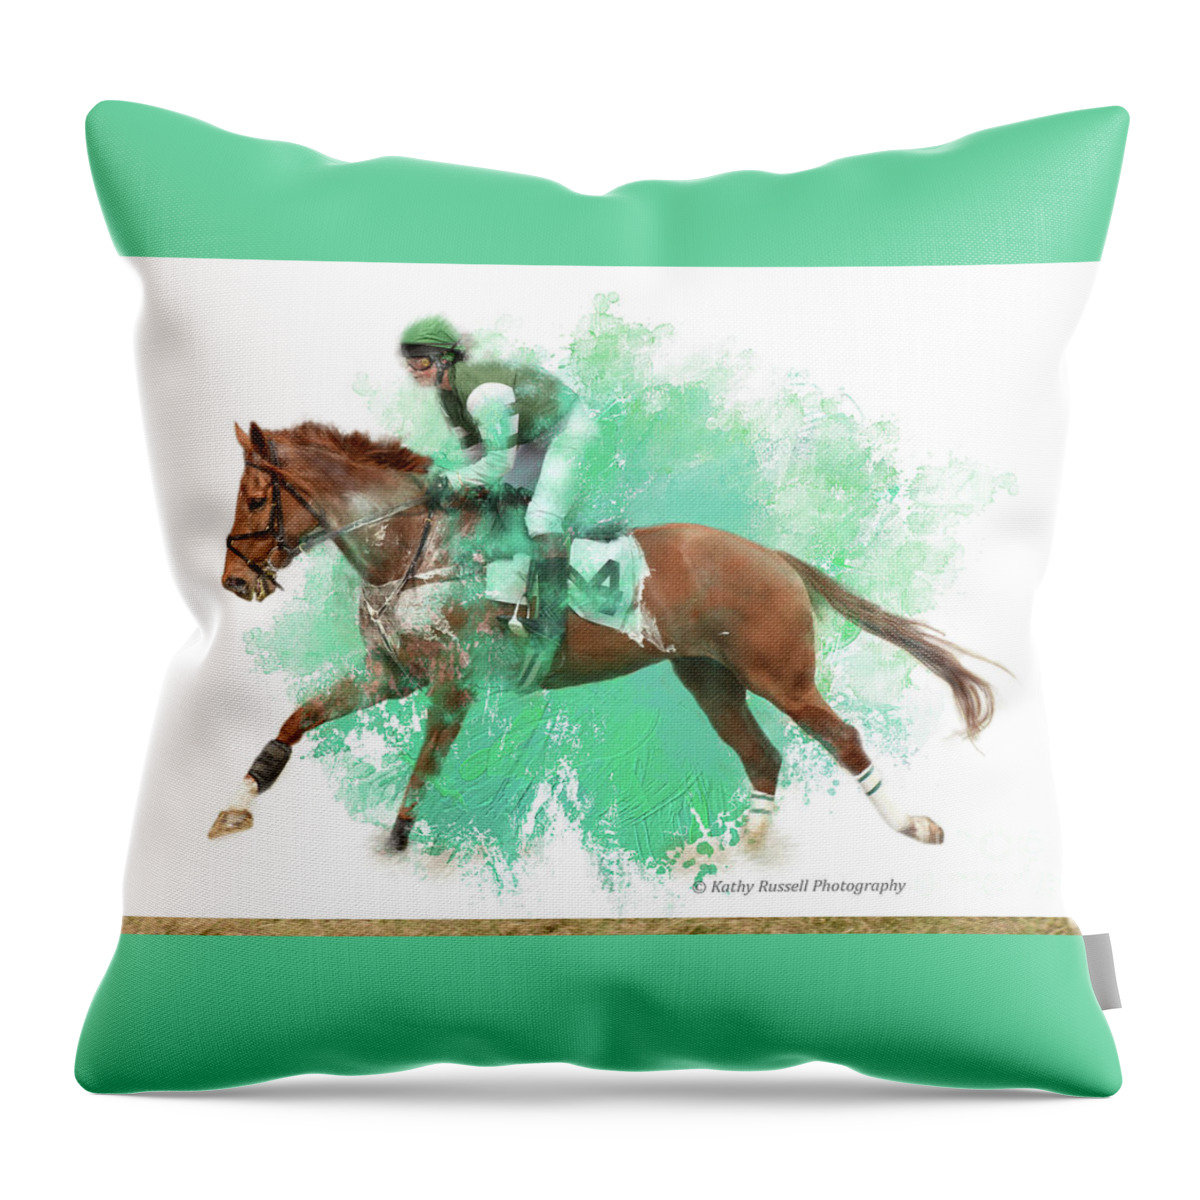  Throw Pillow featuring the digital art Long Stretch by Kathy Russell